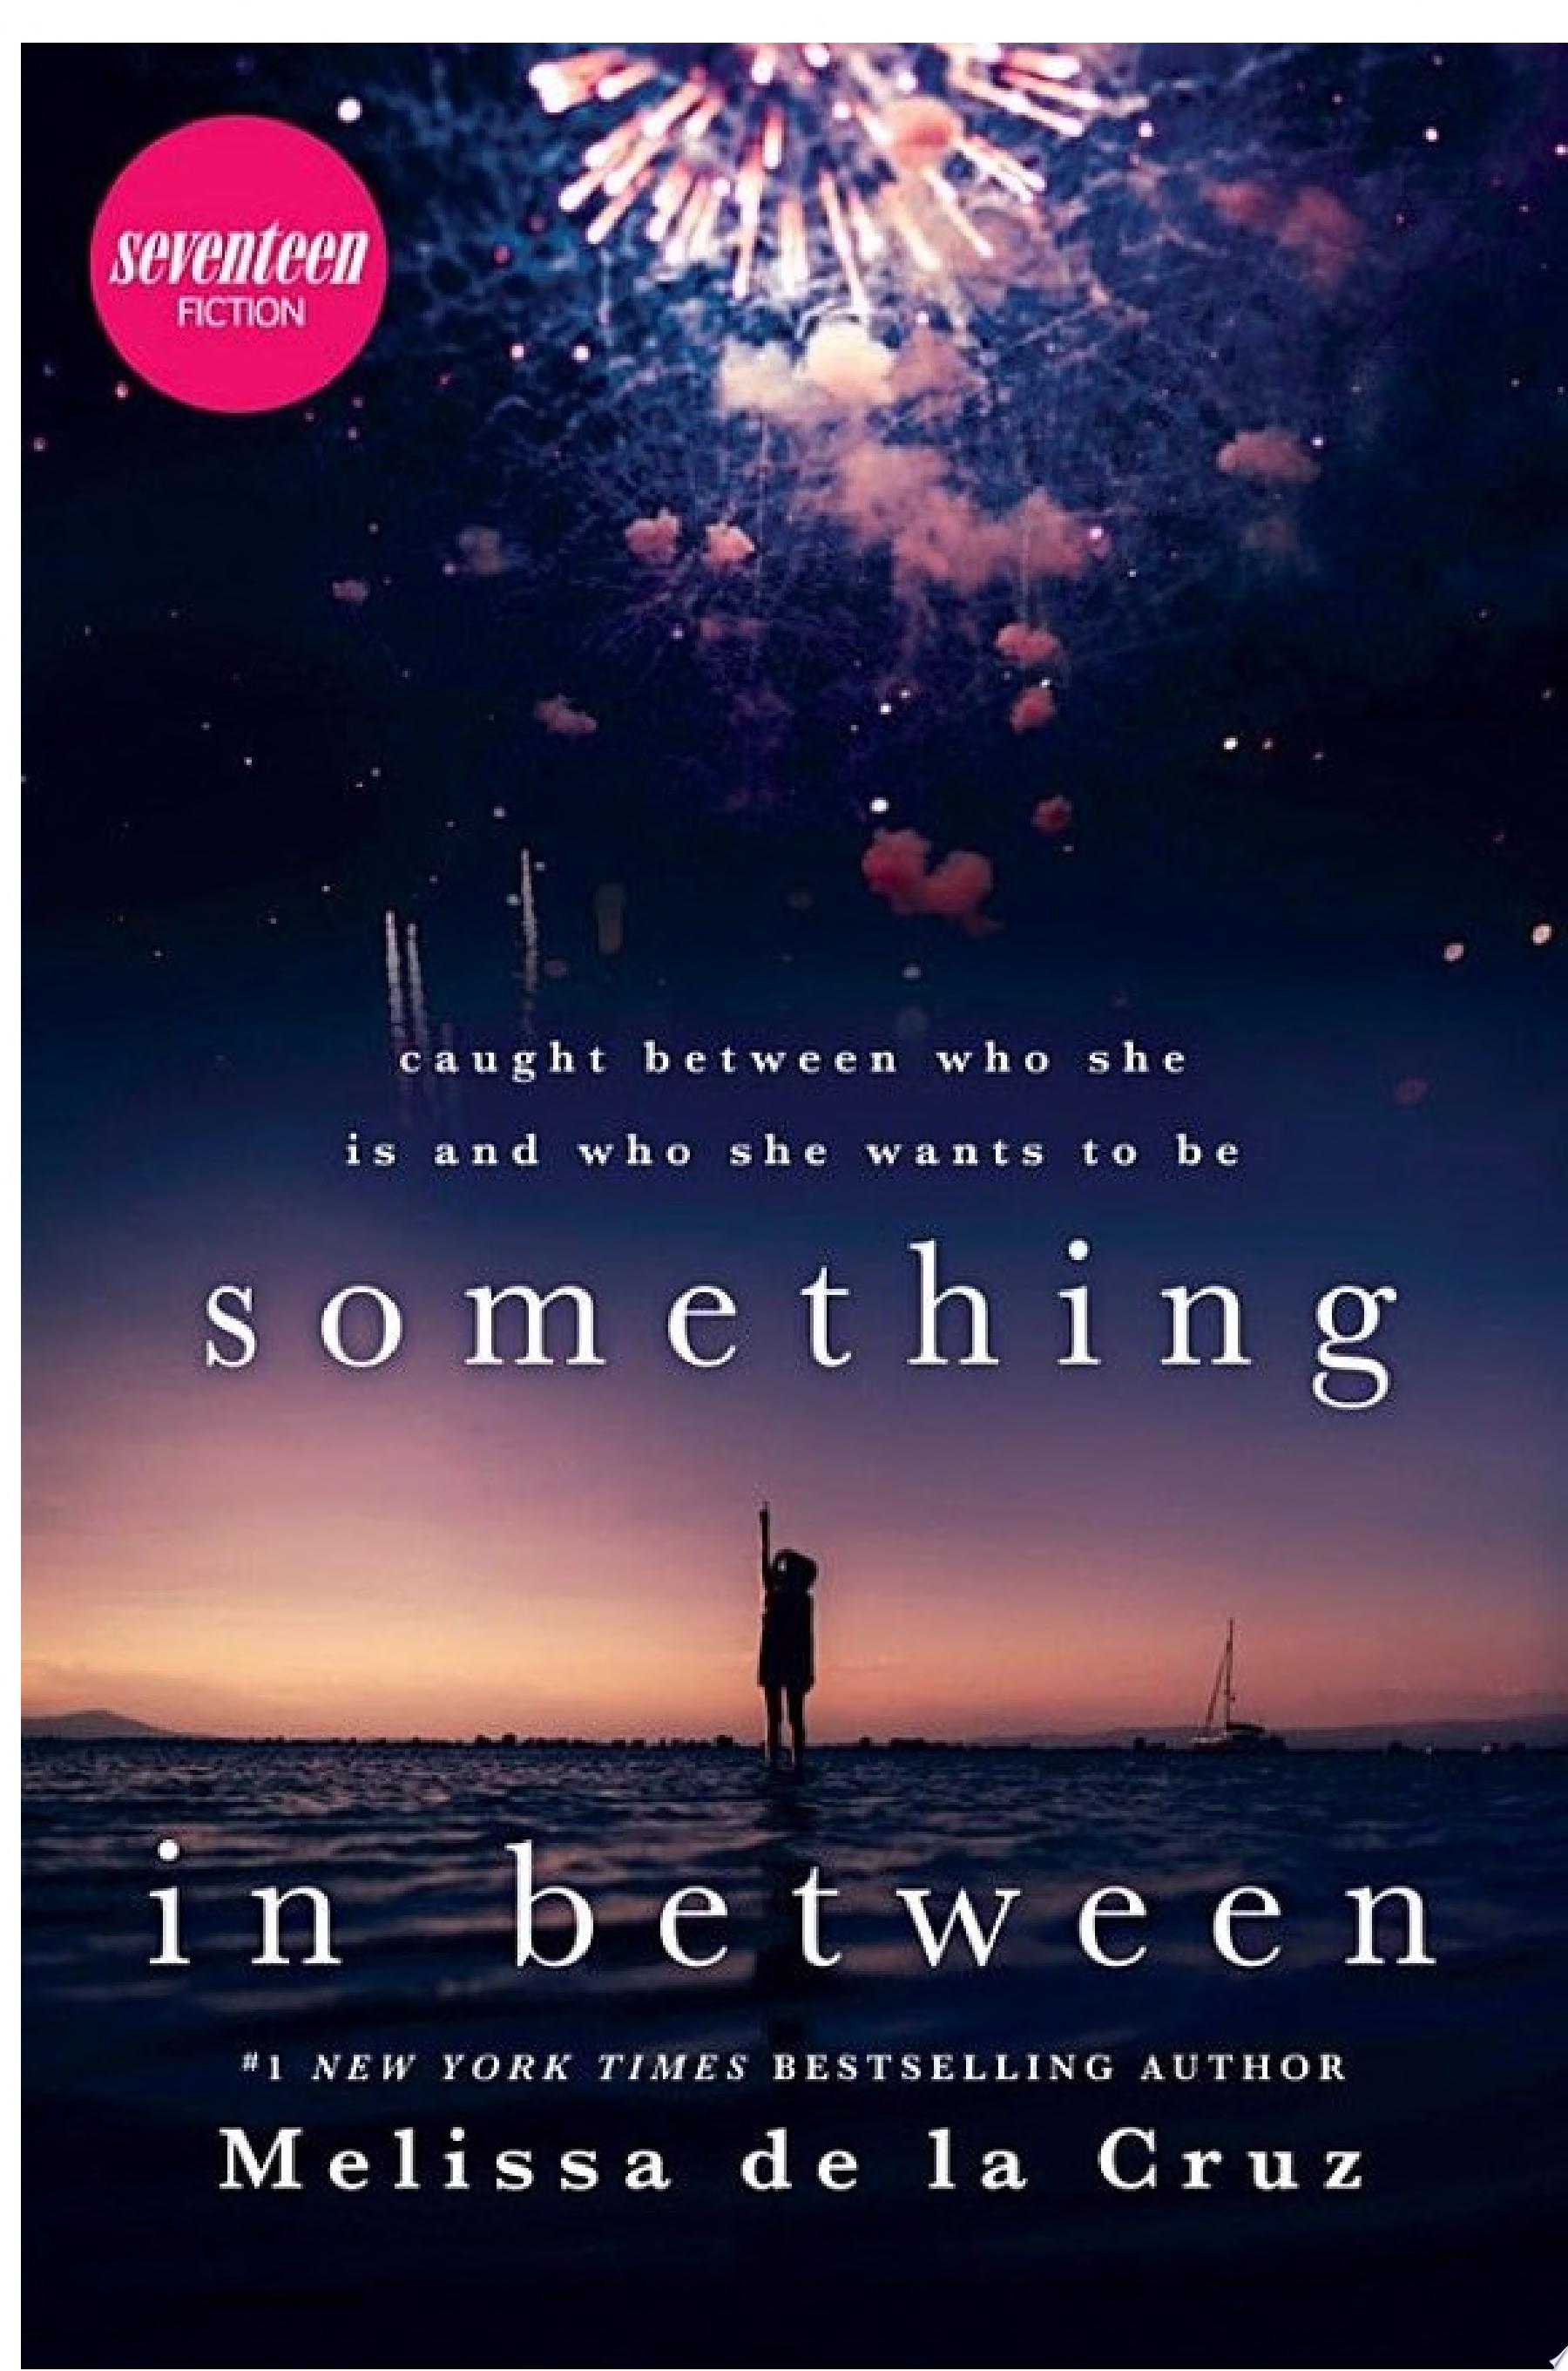 Image for "Something in Between"